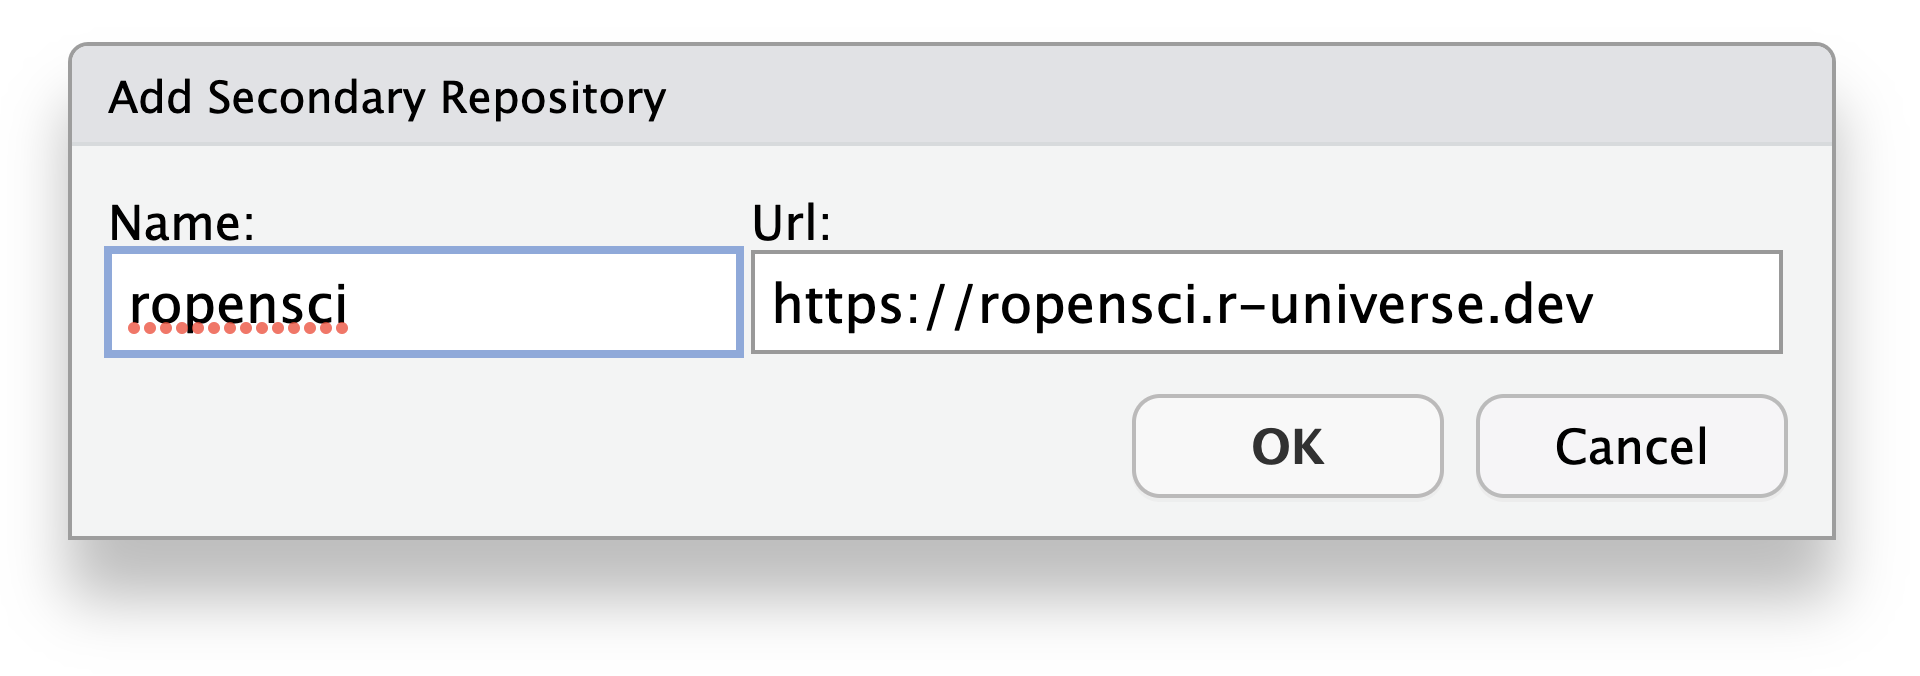 The Add Secondary Repository popup, showing adding ropensci from r-universe.